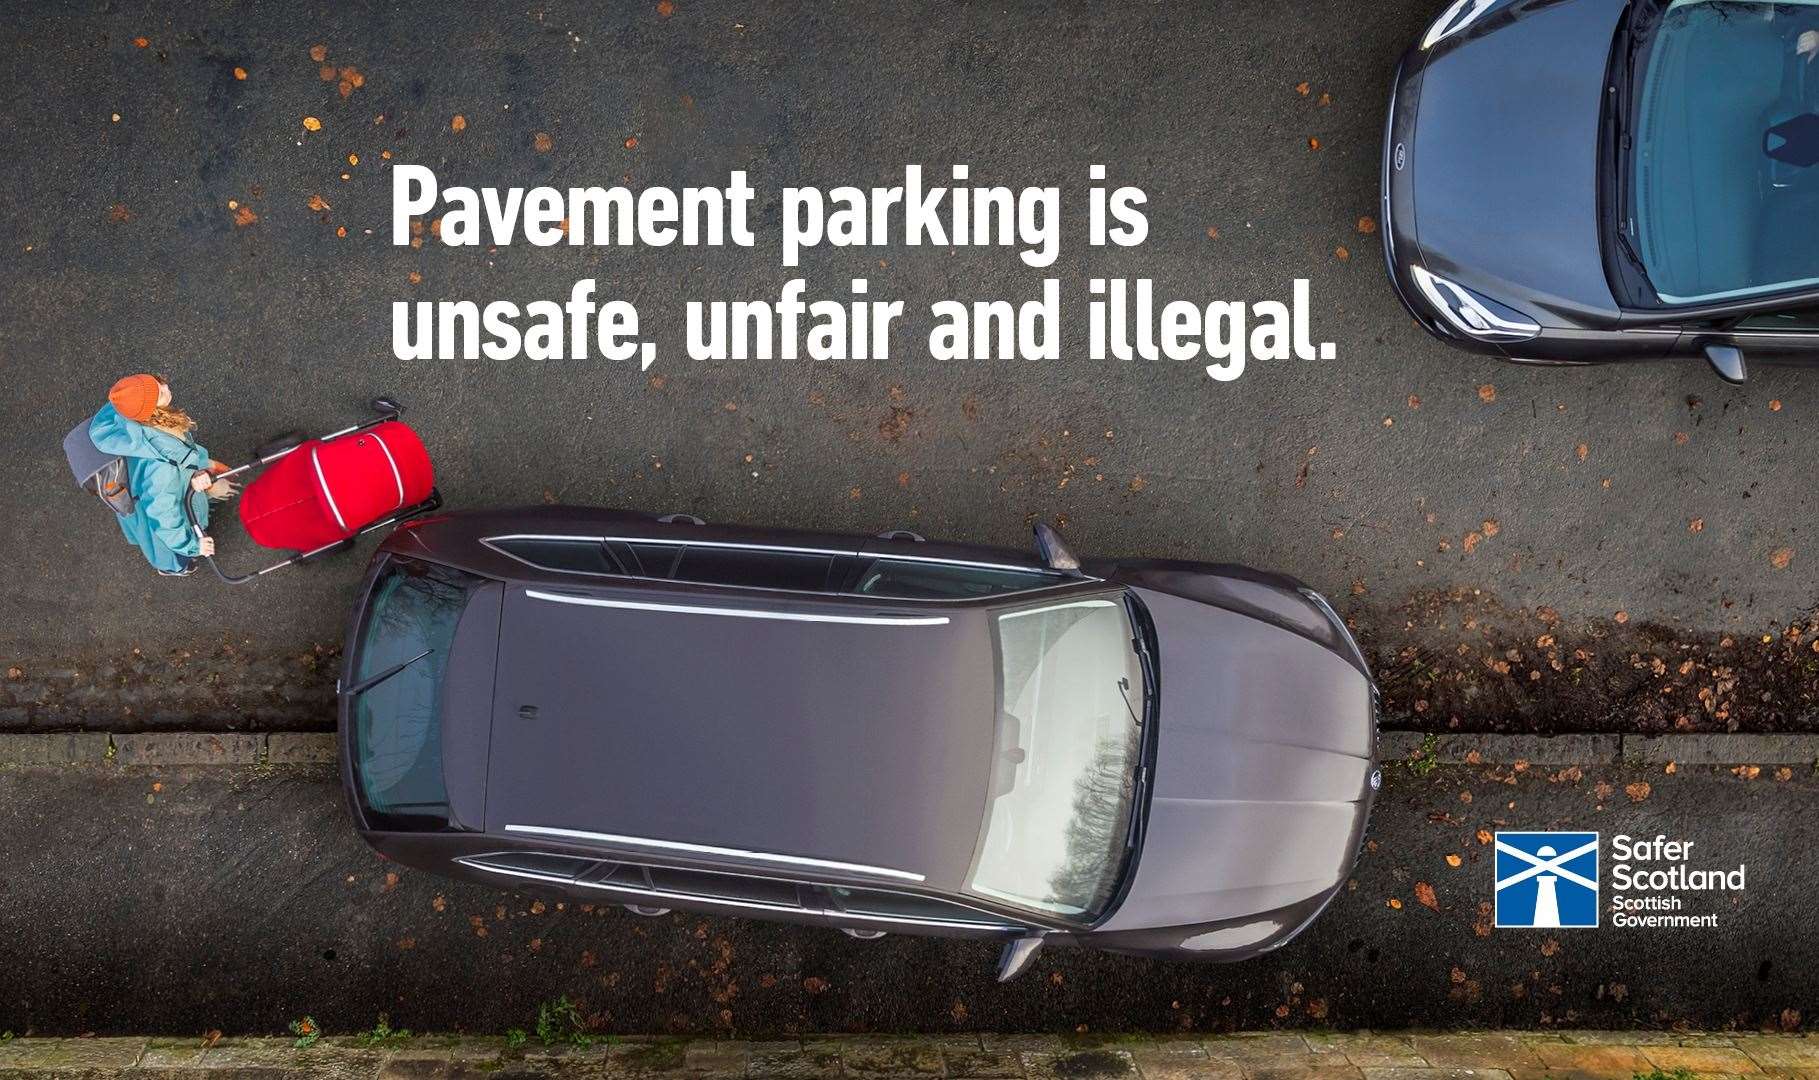 In Scotland, since December, drivers can now be fined £100 for pavement parking. Image: Scottish Government.